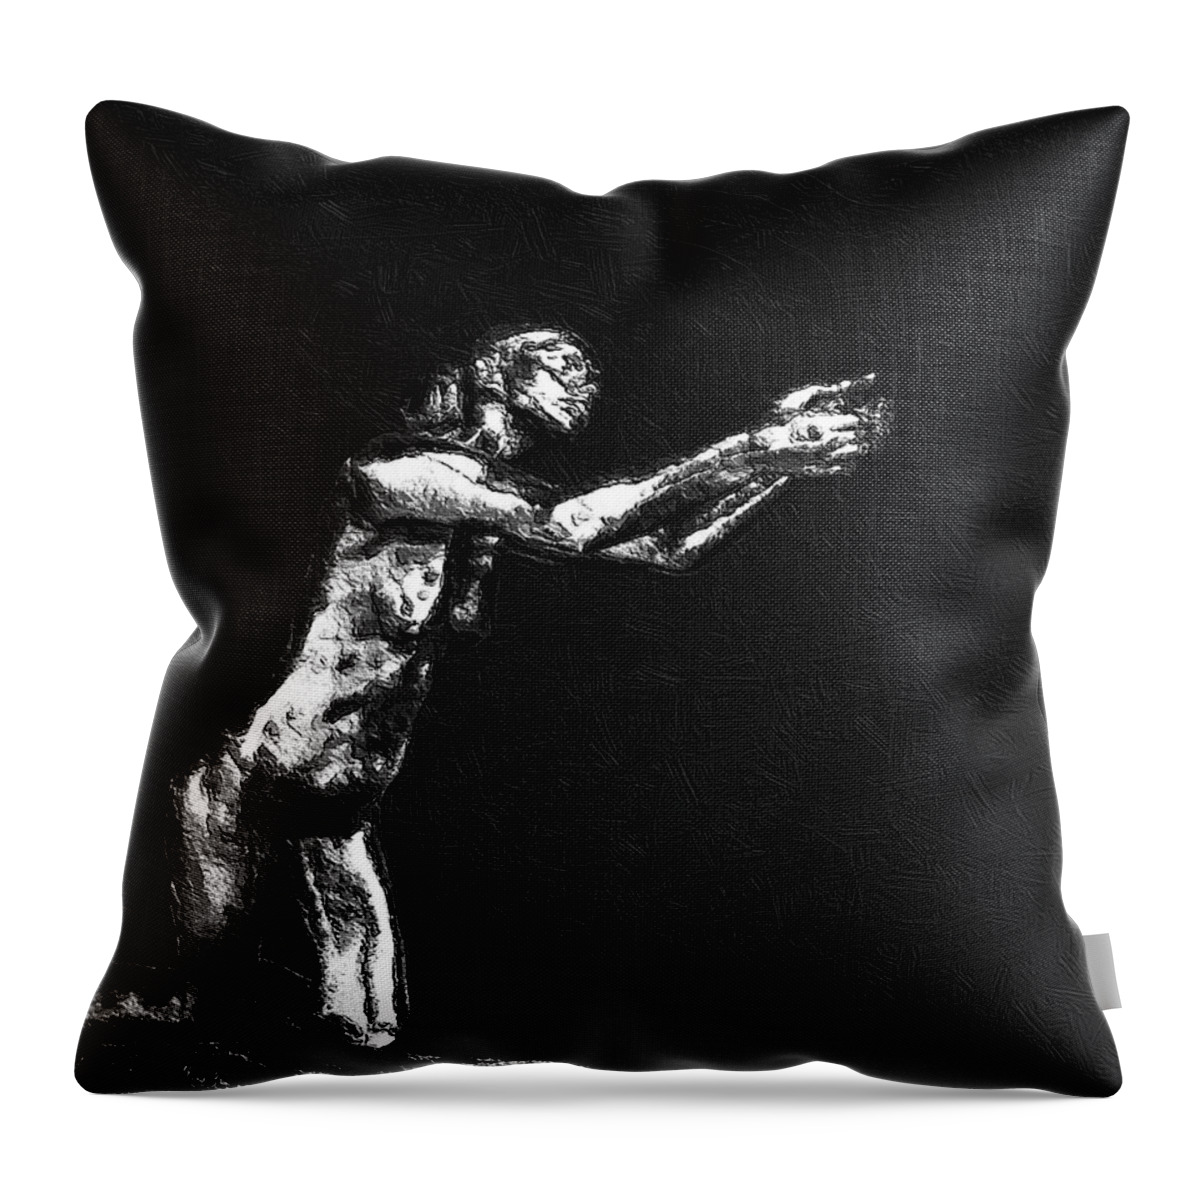 Angel Throw Pillow featuring the painting Painting Of The Implorer by Tony Rubino